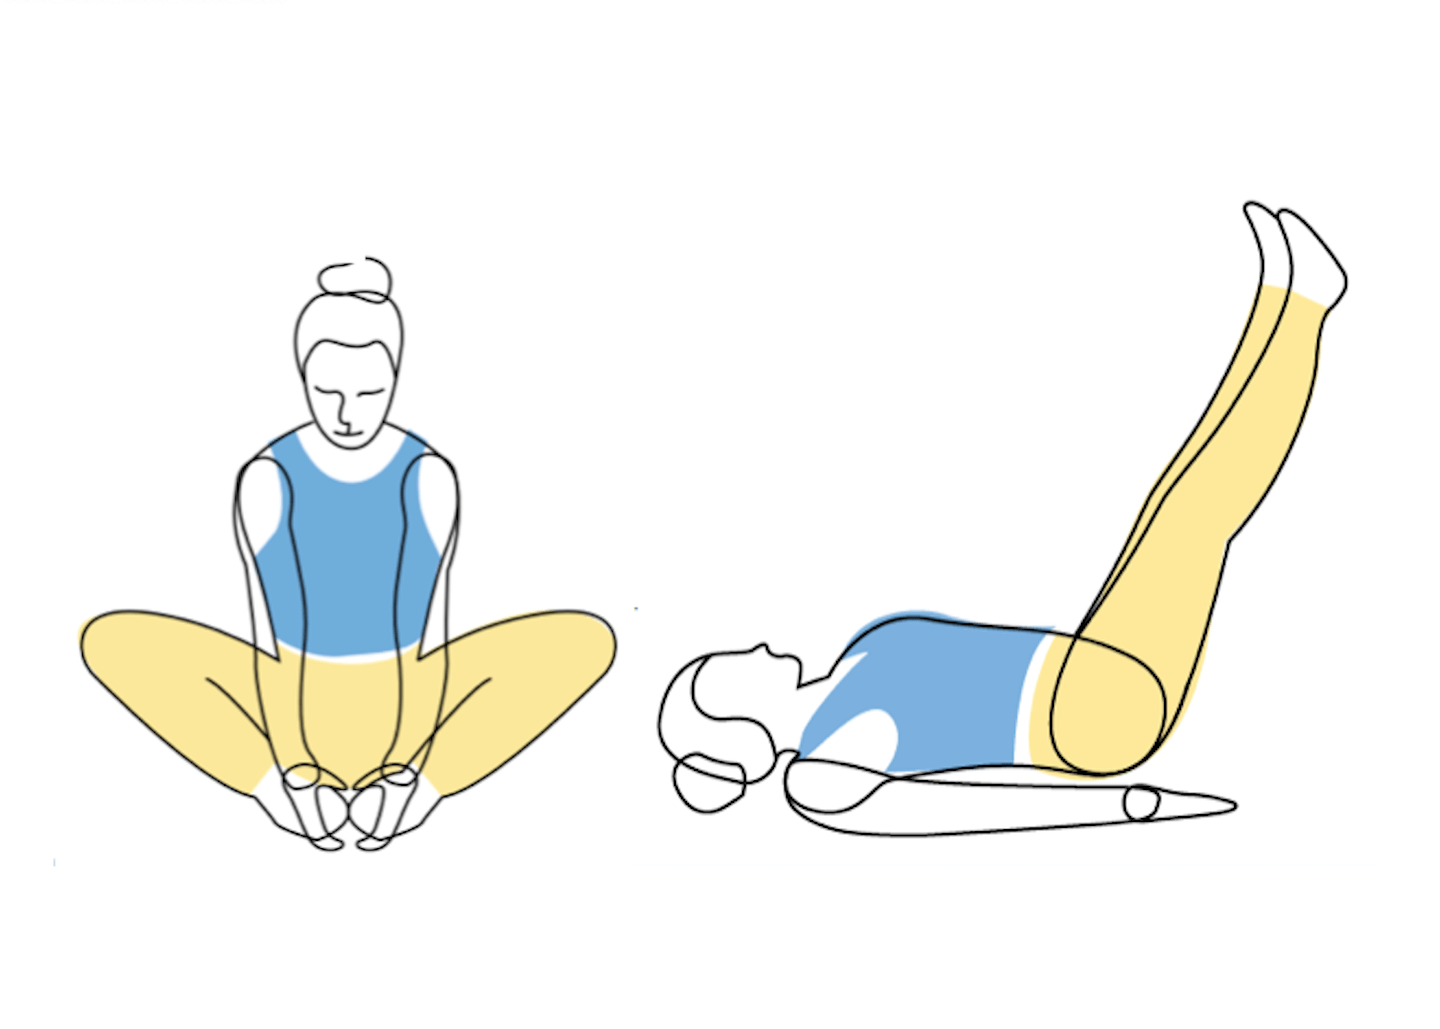 Strengthen Your Lower Back: 20 Engaging Exercises to Strengthen Lower Back  - Mainstay Medical